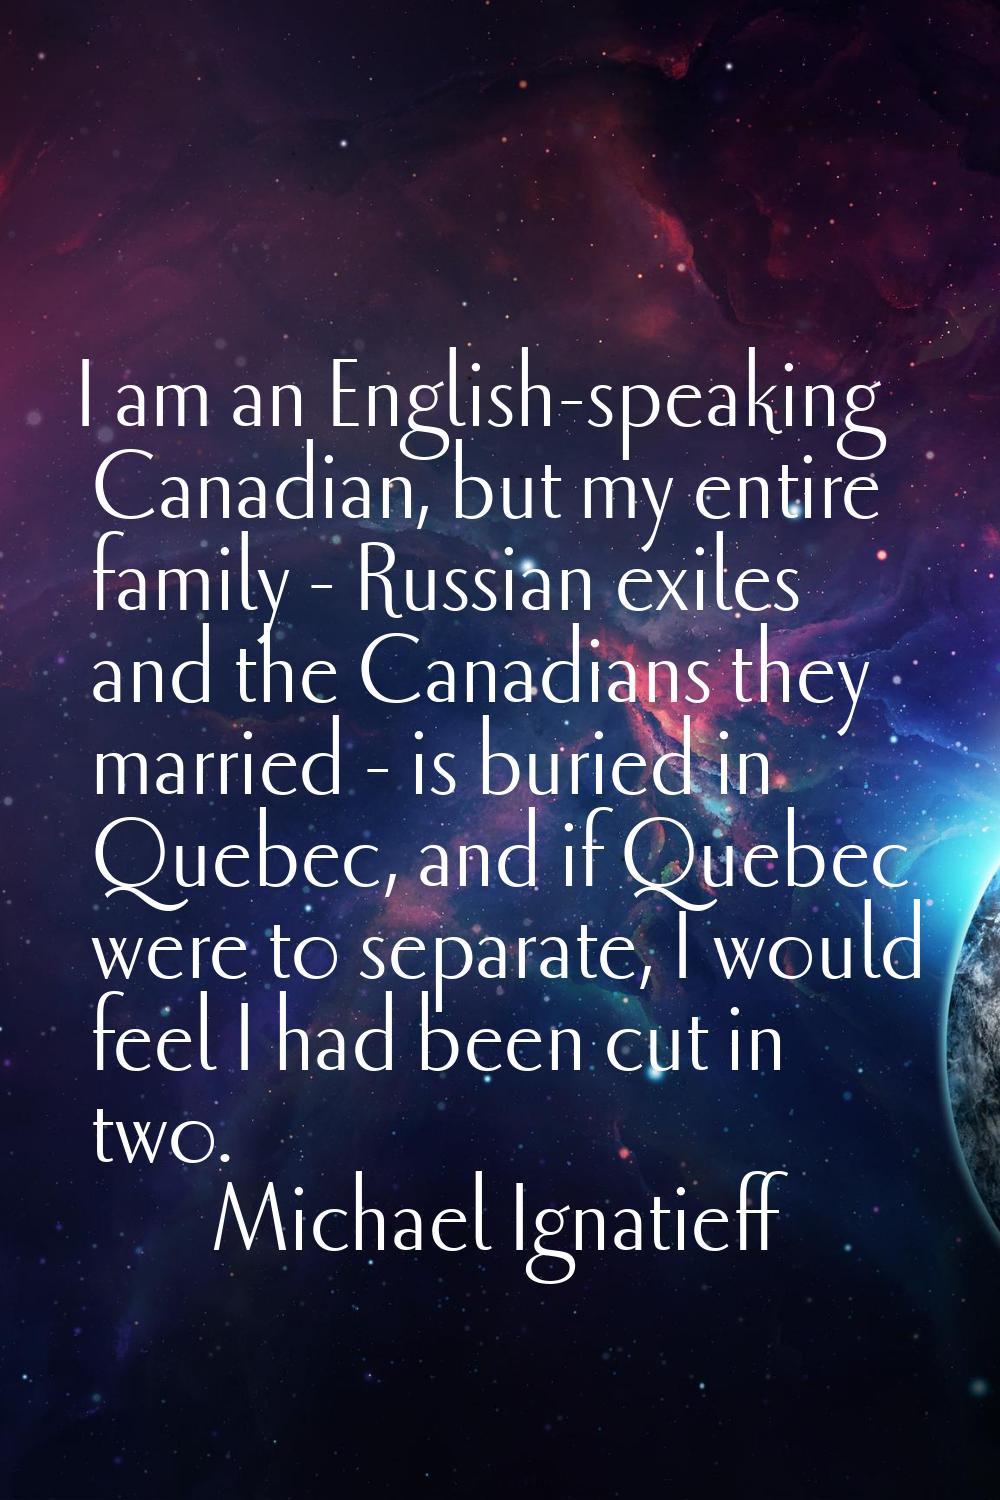 I am an English-speaking Canadian, but my entire family - Russian exiles and the Canadians they mar